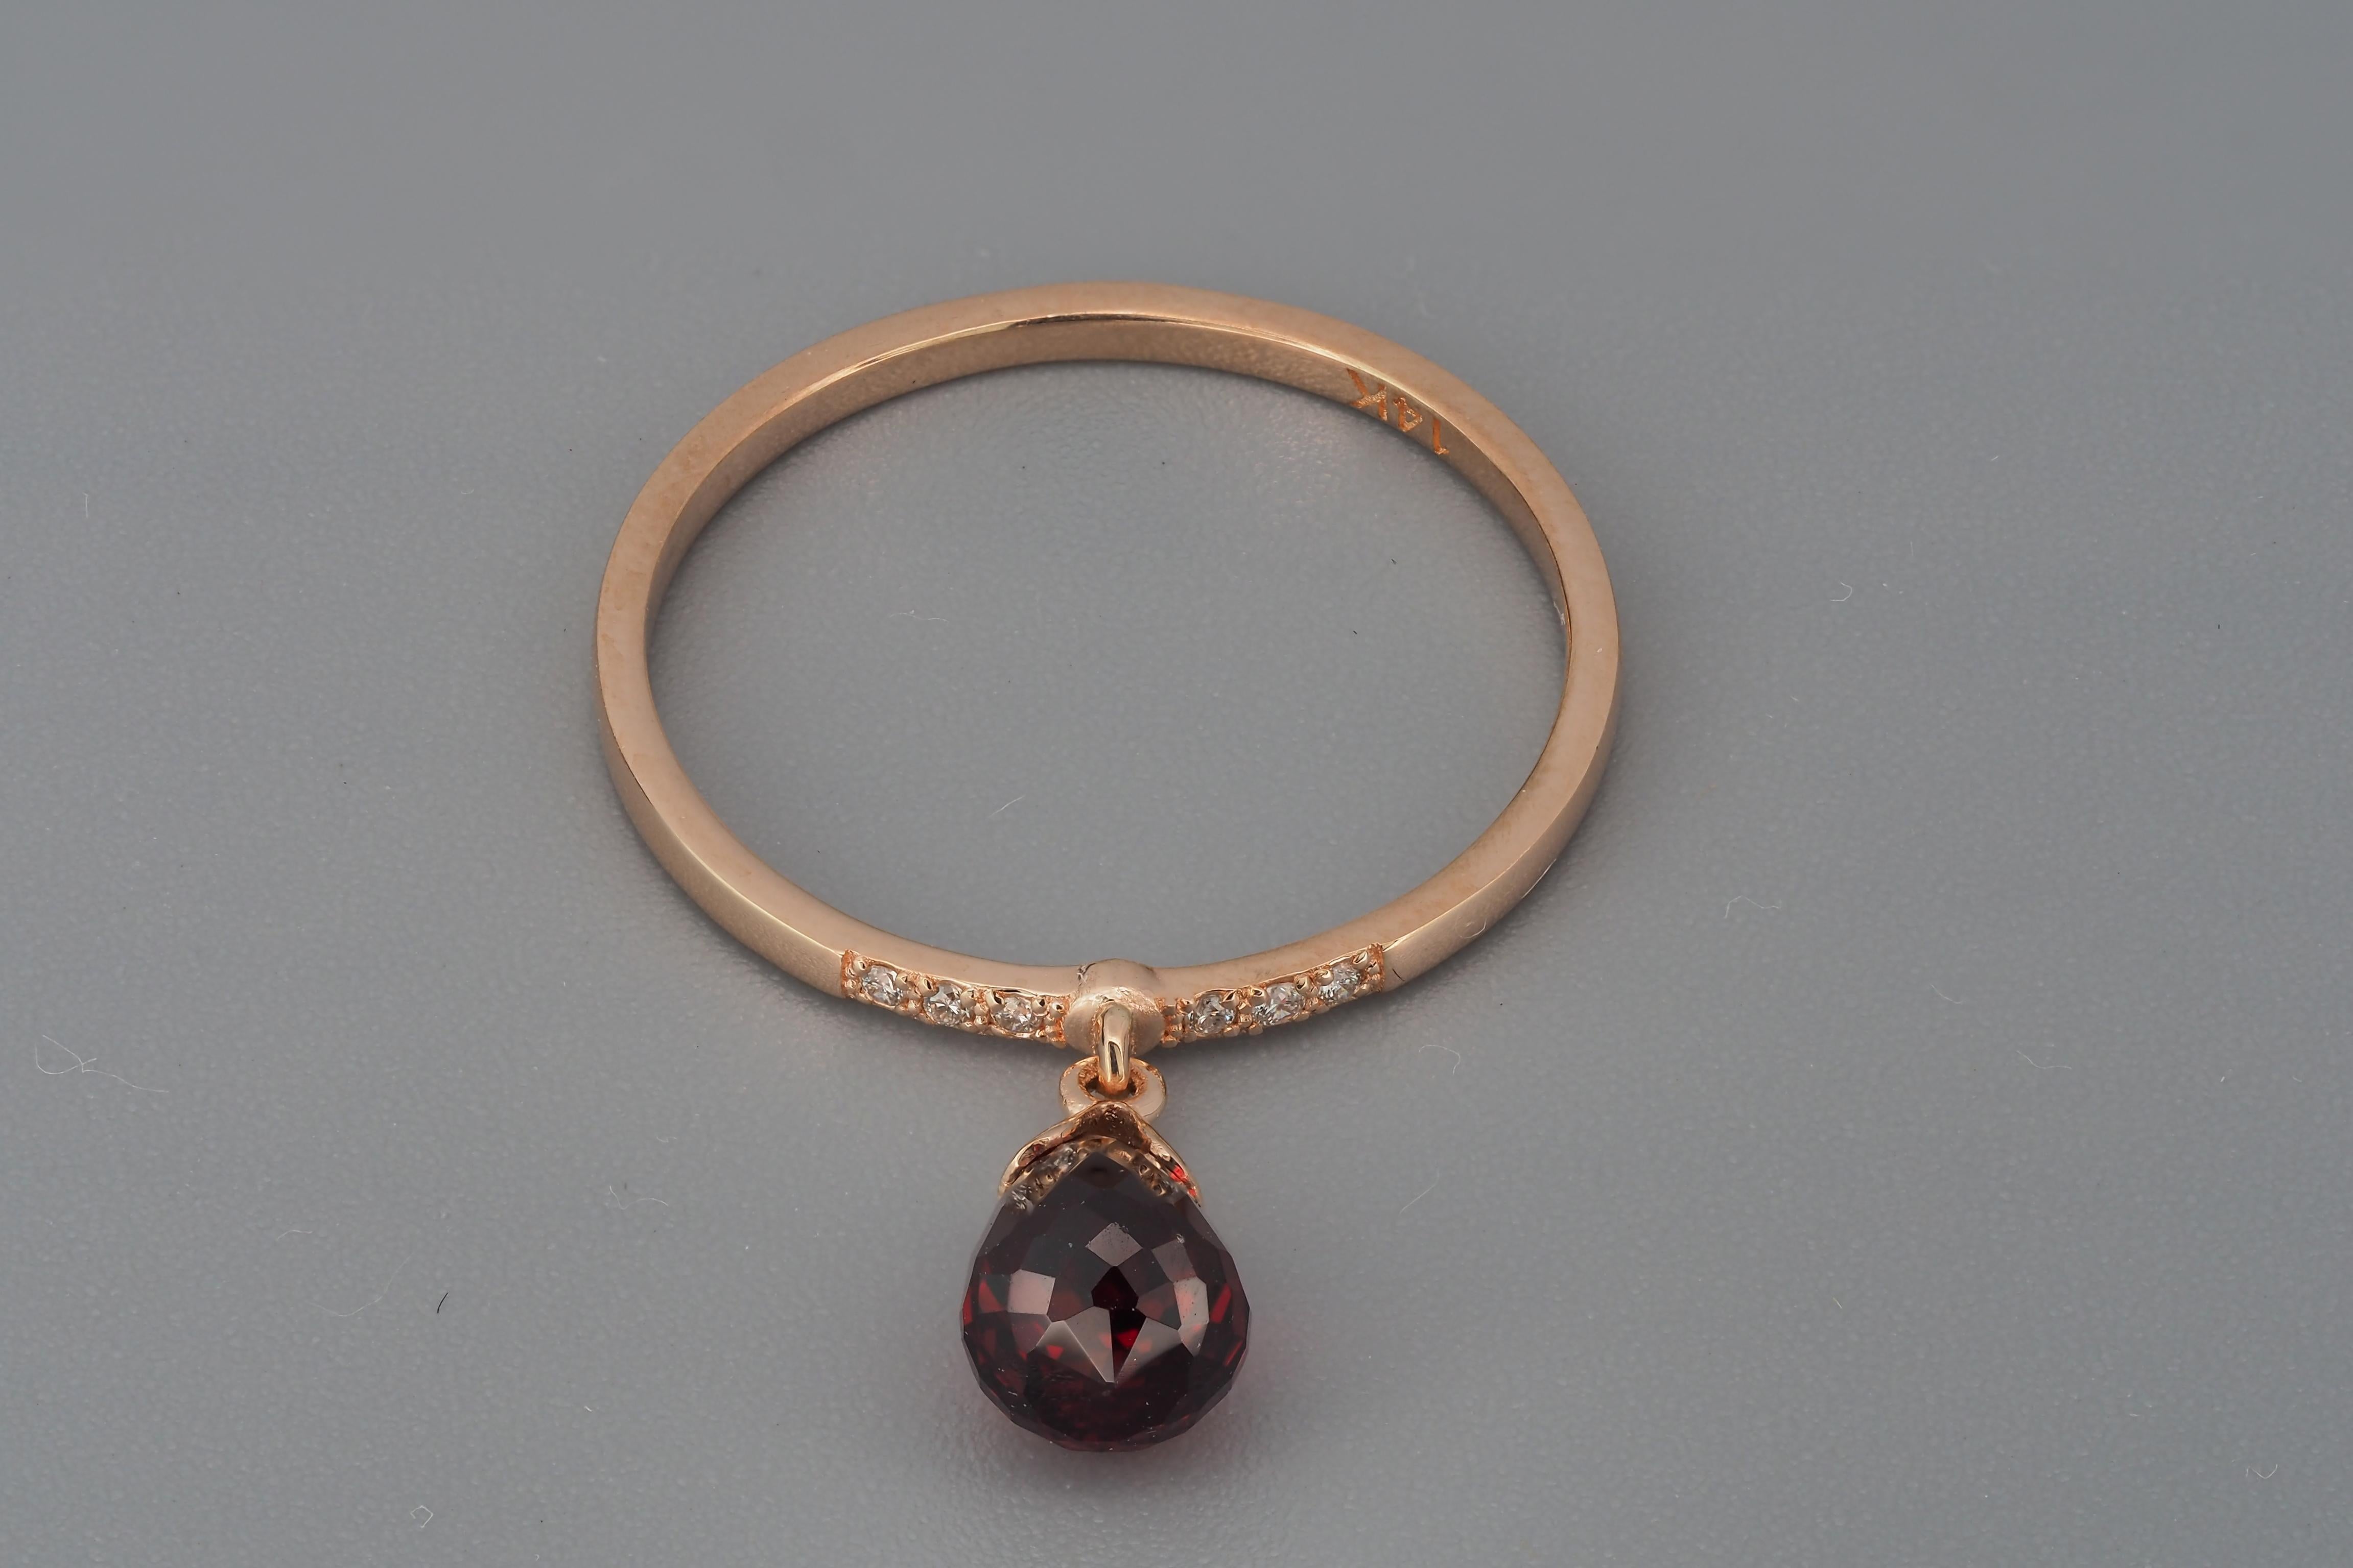 For Sale:  14k Gold Ring with Briolette Cut Garnet and Diamonds 3